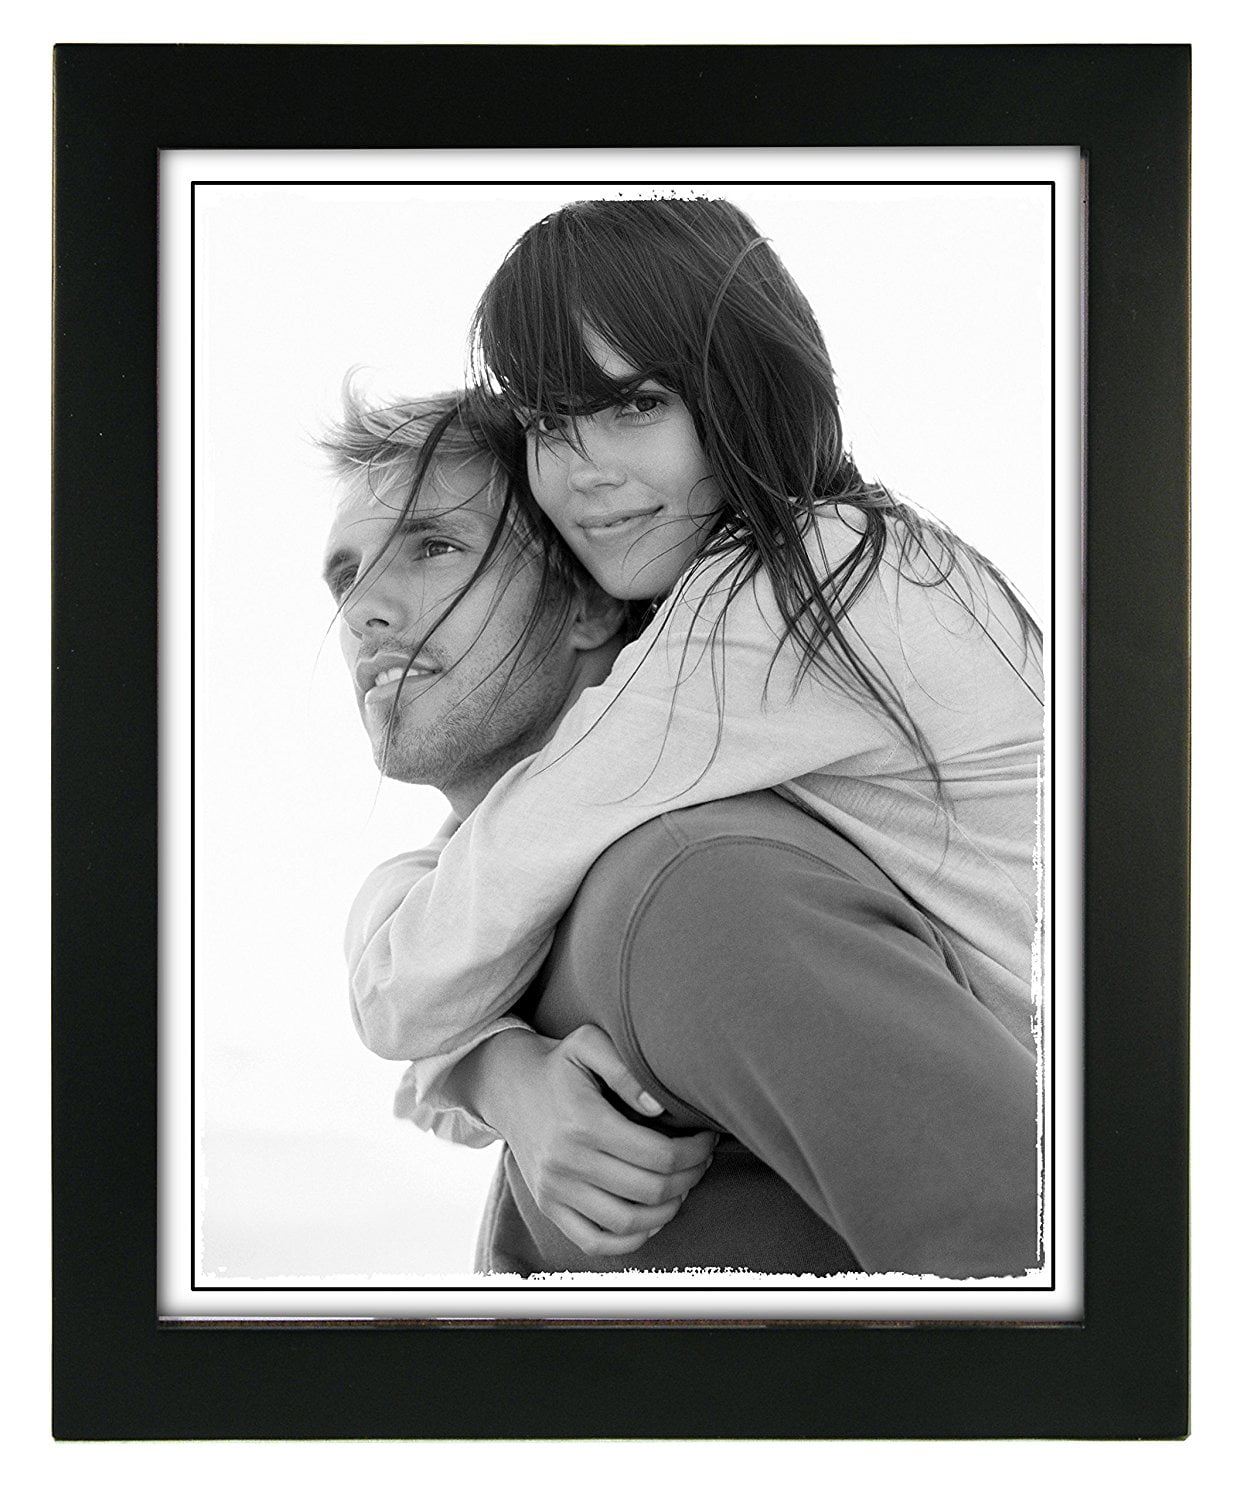 8x10 Black Wood Picture Frame Made To, 8 X 10 Black Wooden Picture Frames